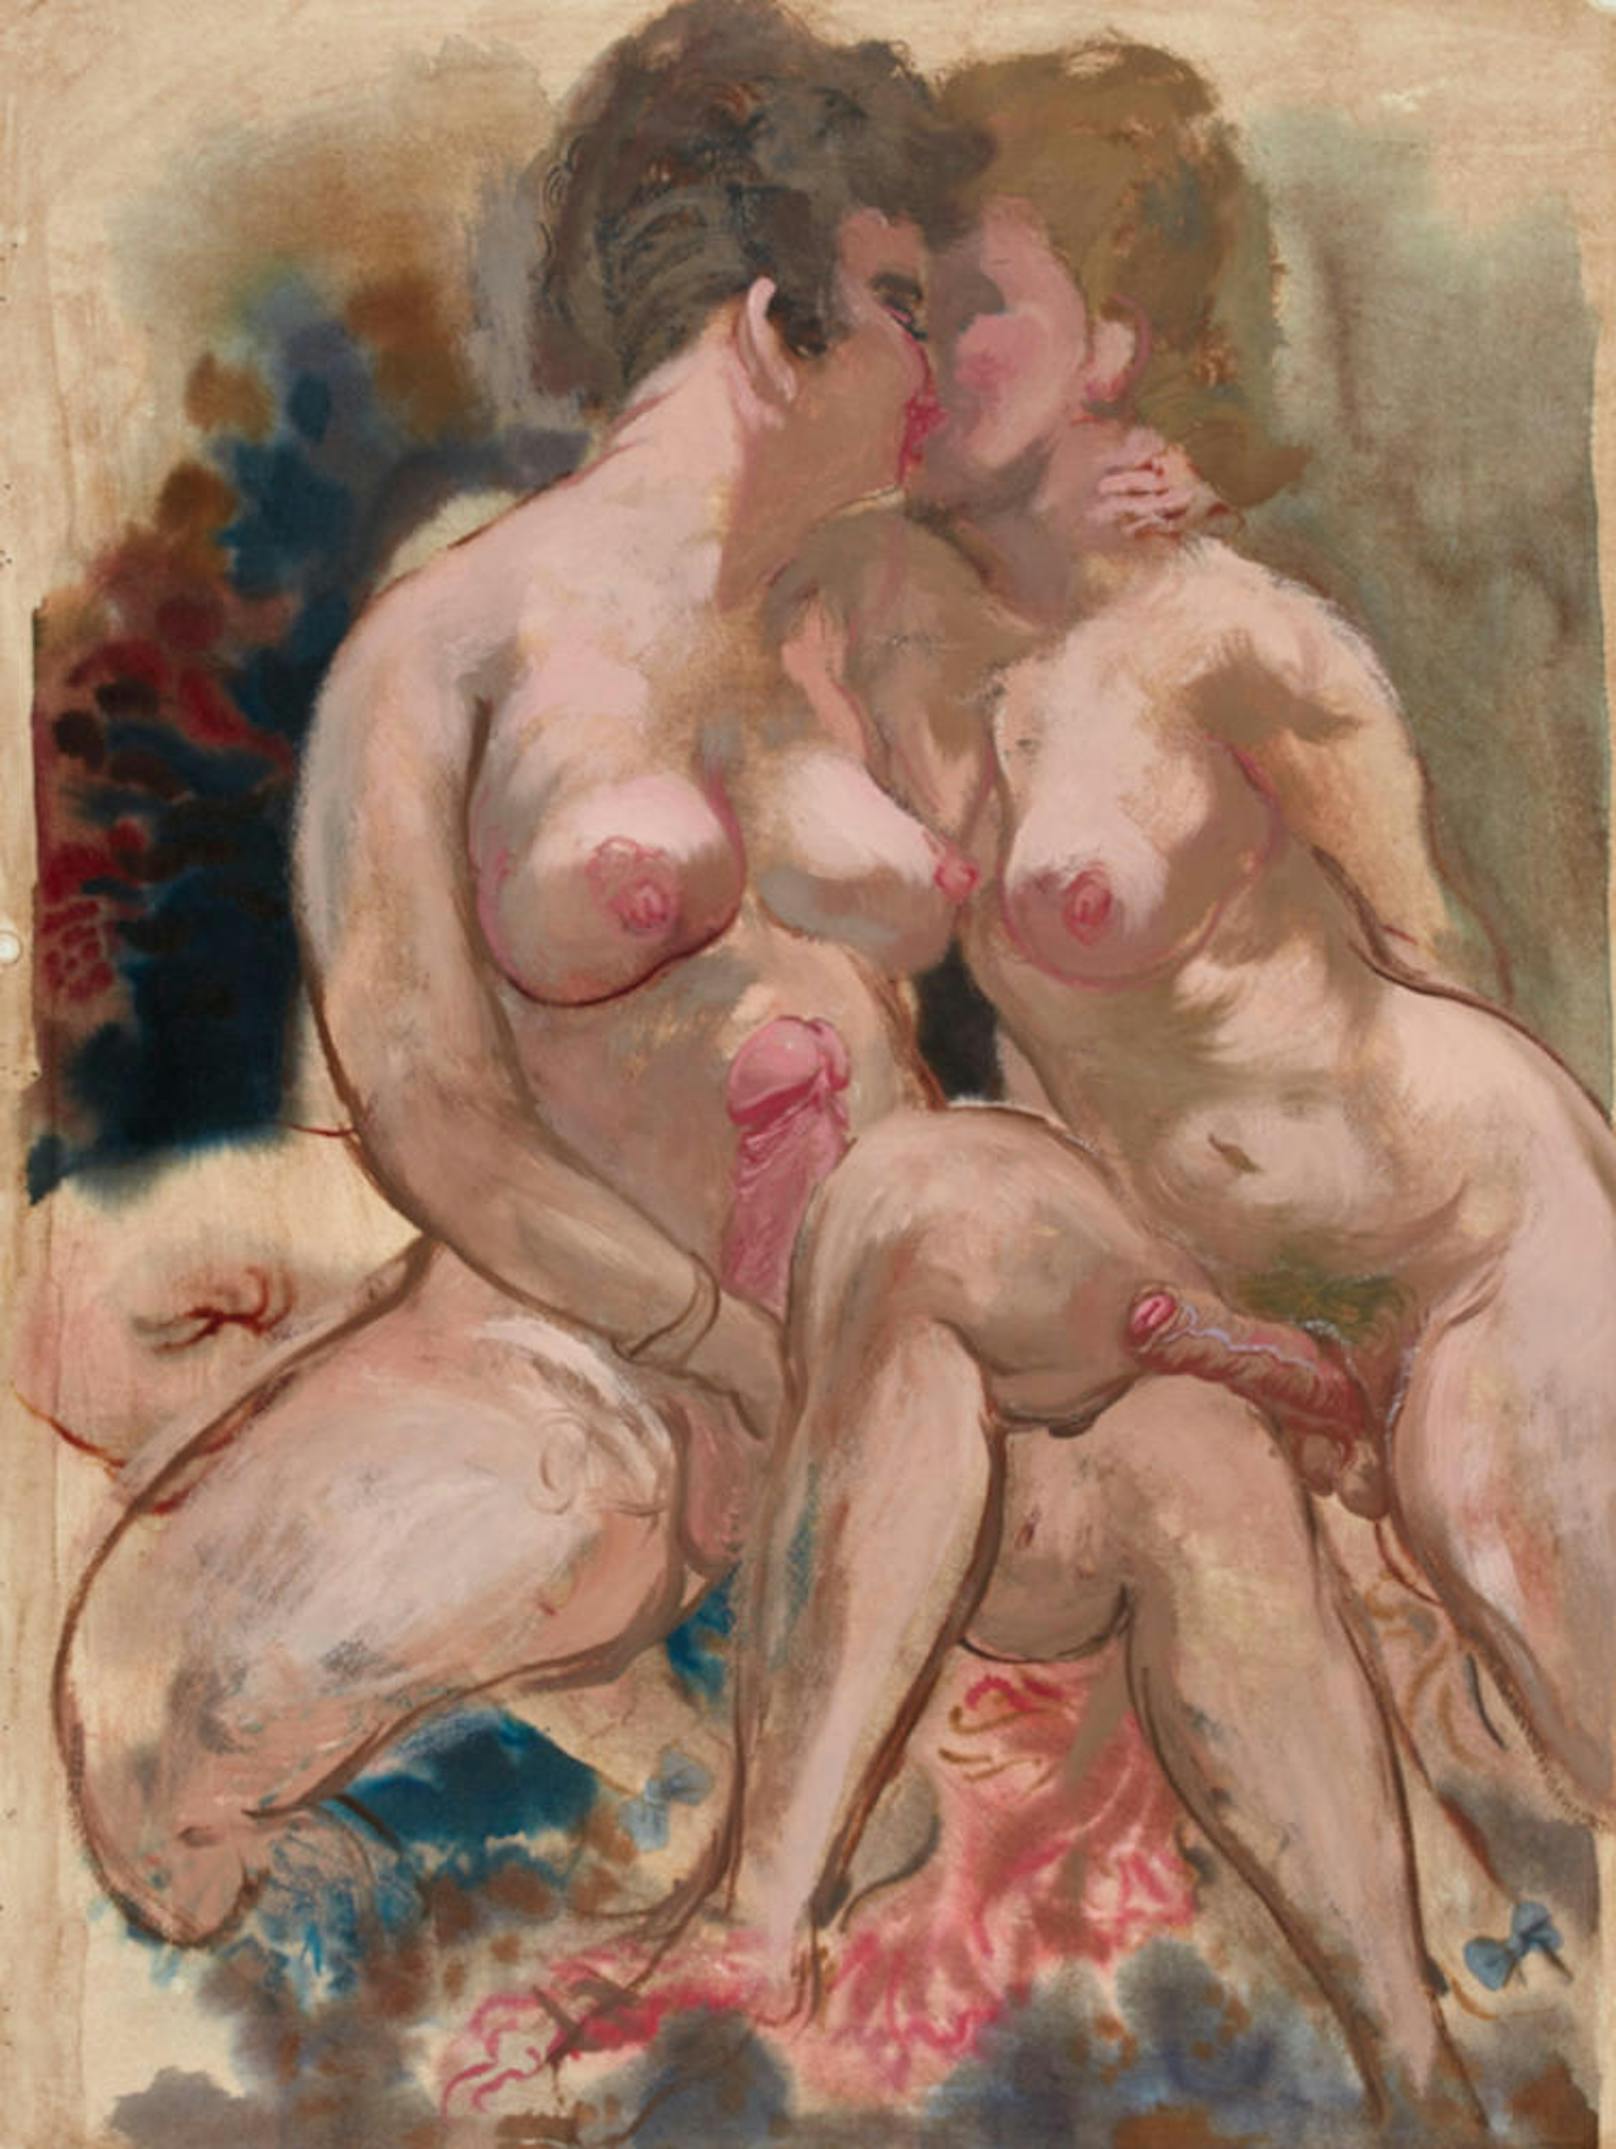 PROPERTY FROM A DISTINGUISHED PRIVATE COLLECTION<br>
George Grosz<br>
UNTITLED (COUPLE)<br>
Estimate  8,000 - 12,000